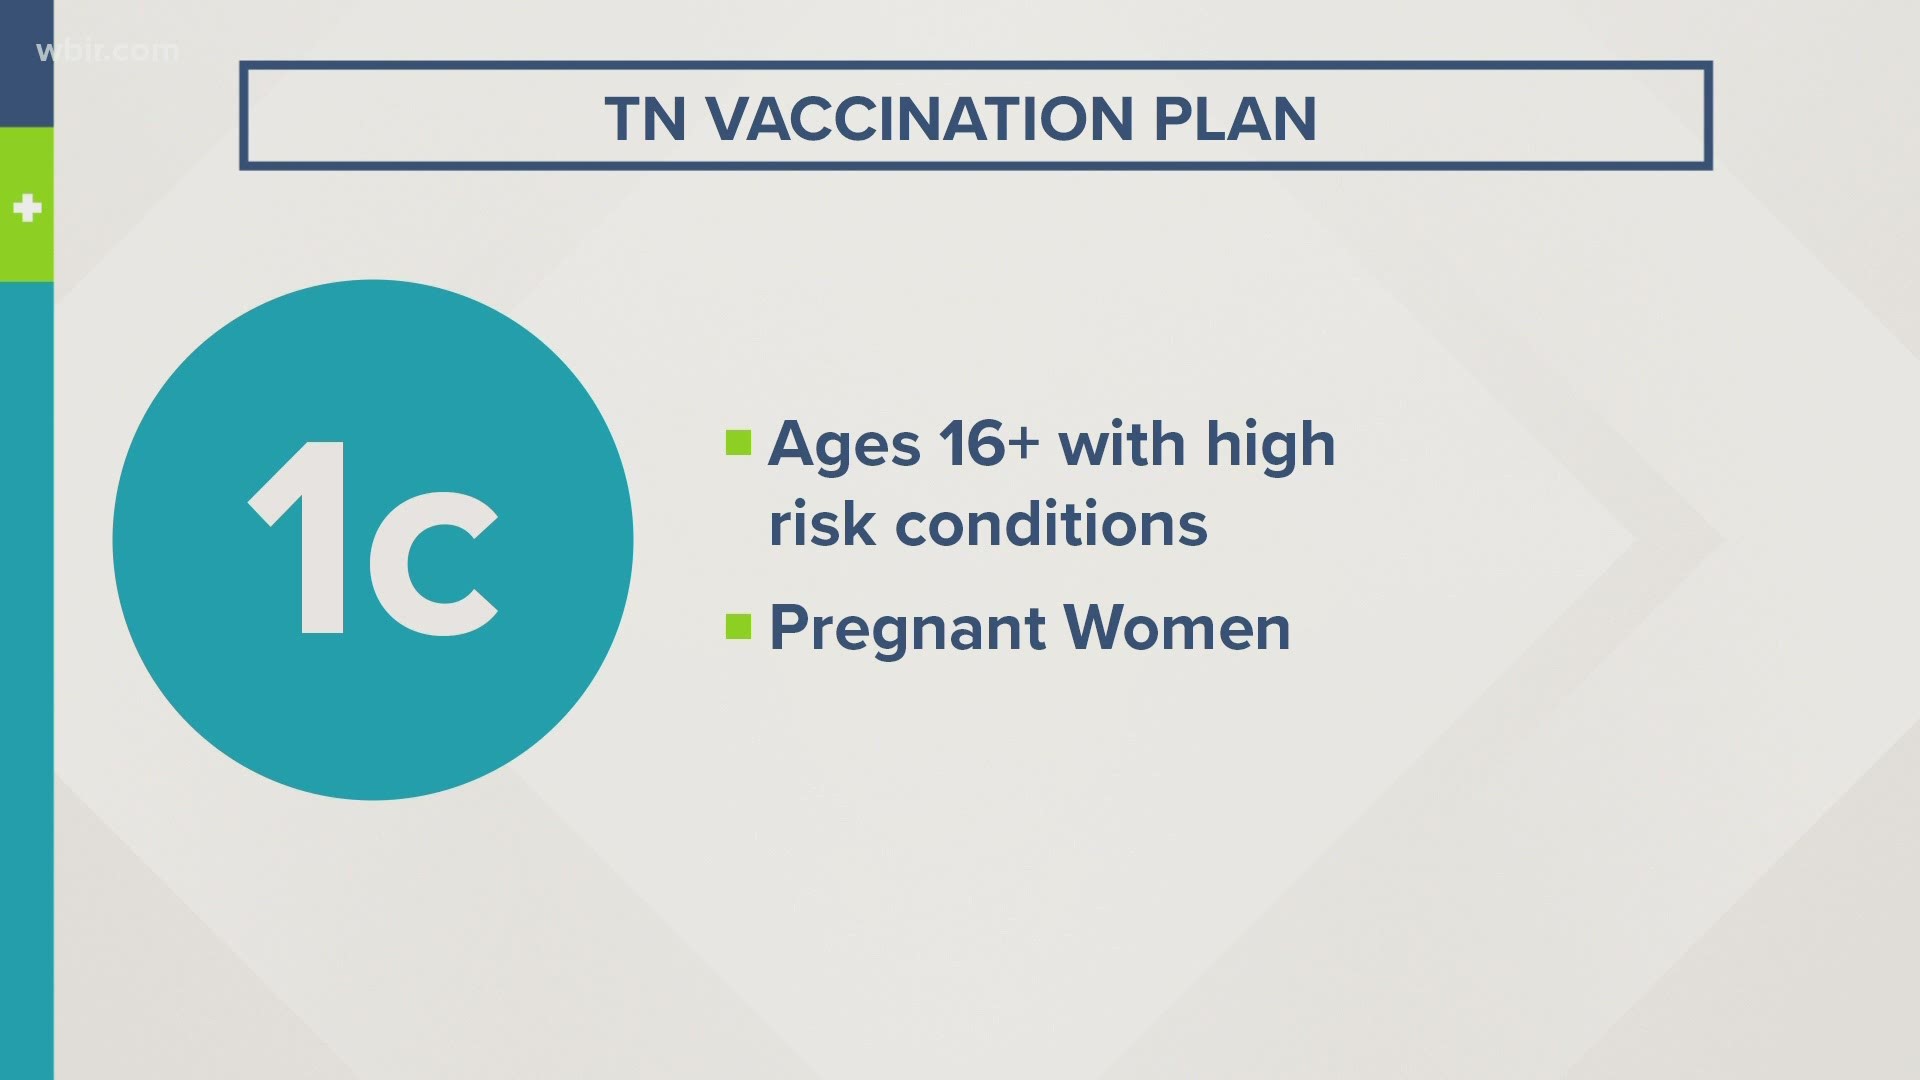 More than one million more Tennesseans will qualify for the COVID-19 vaccine.